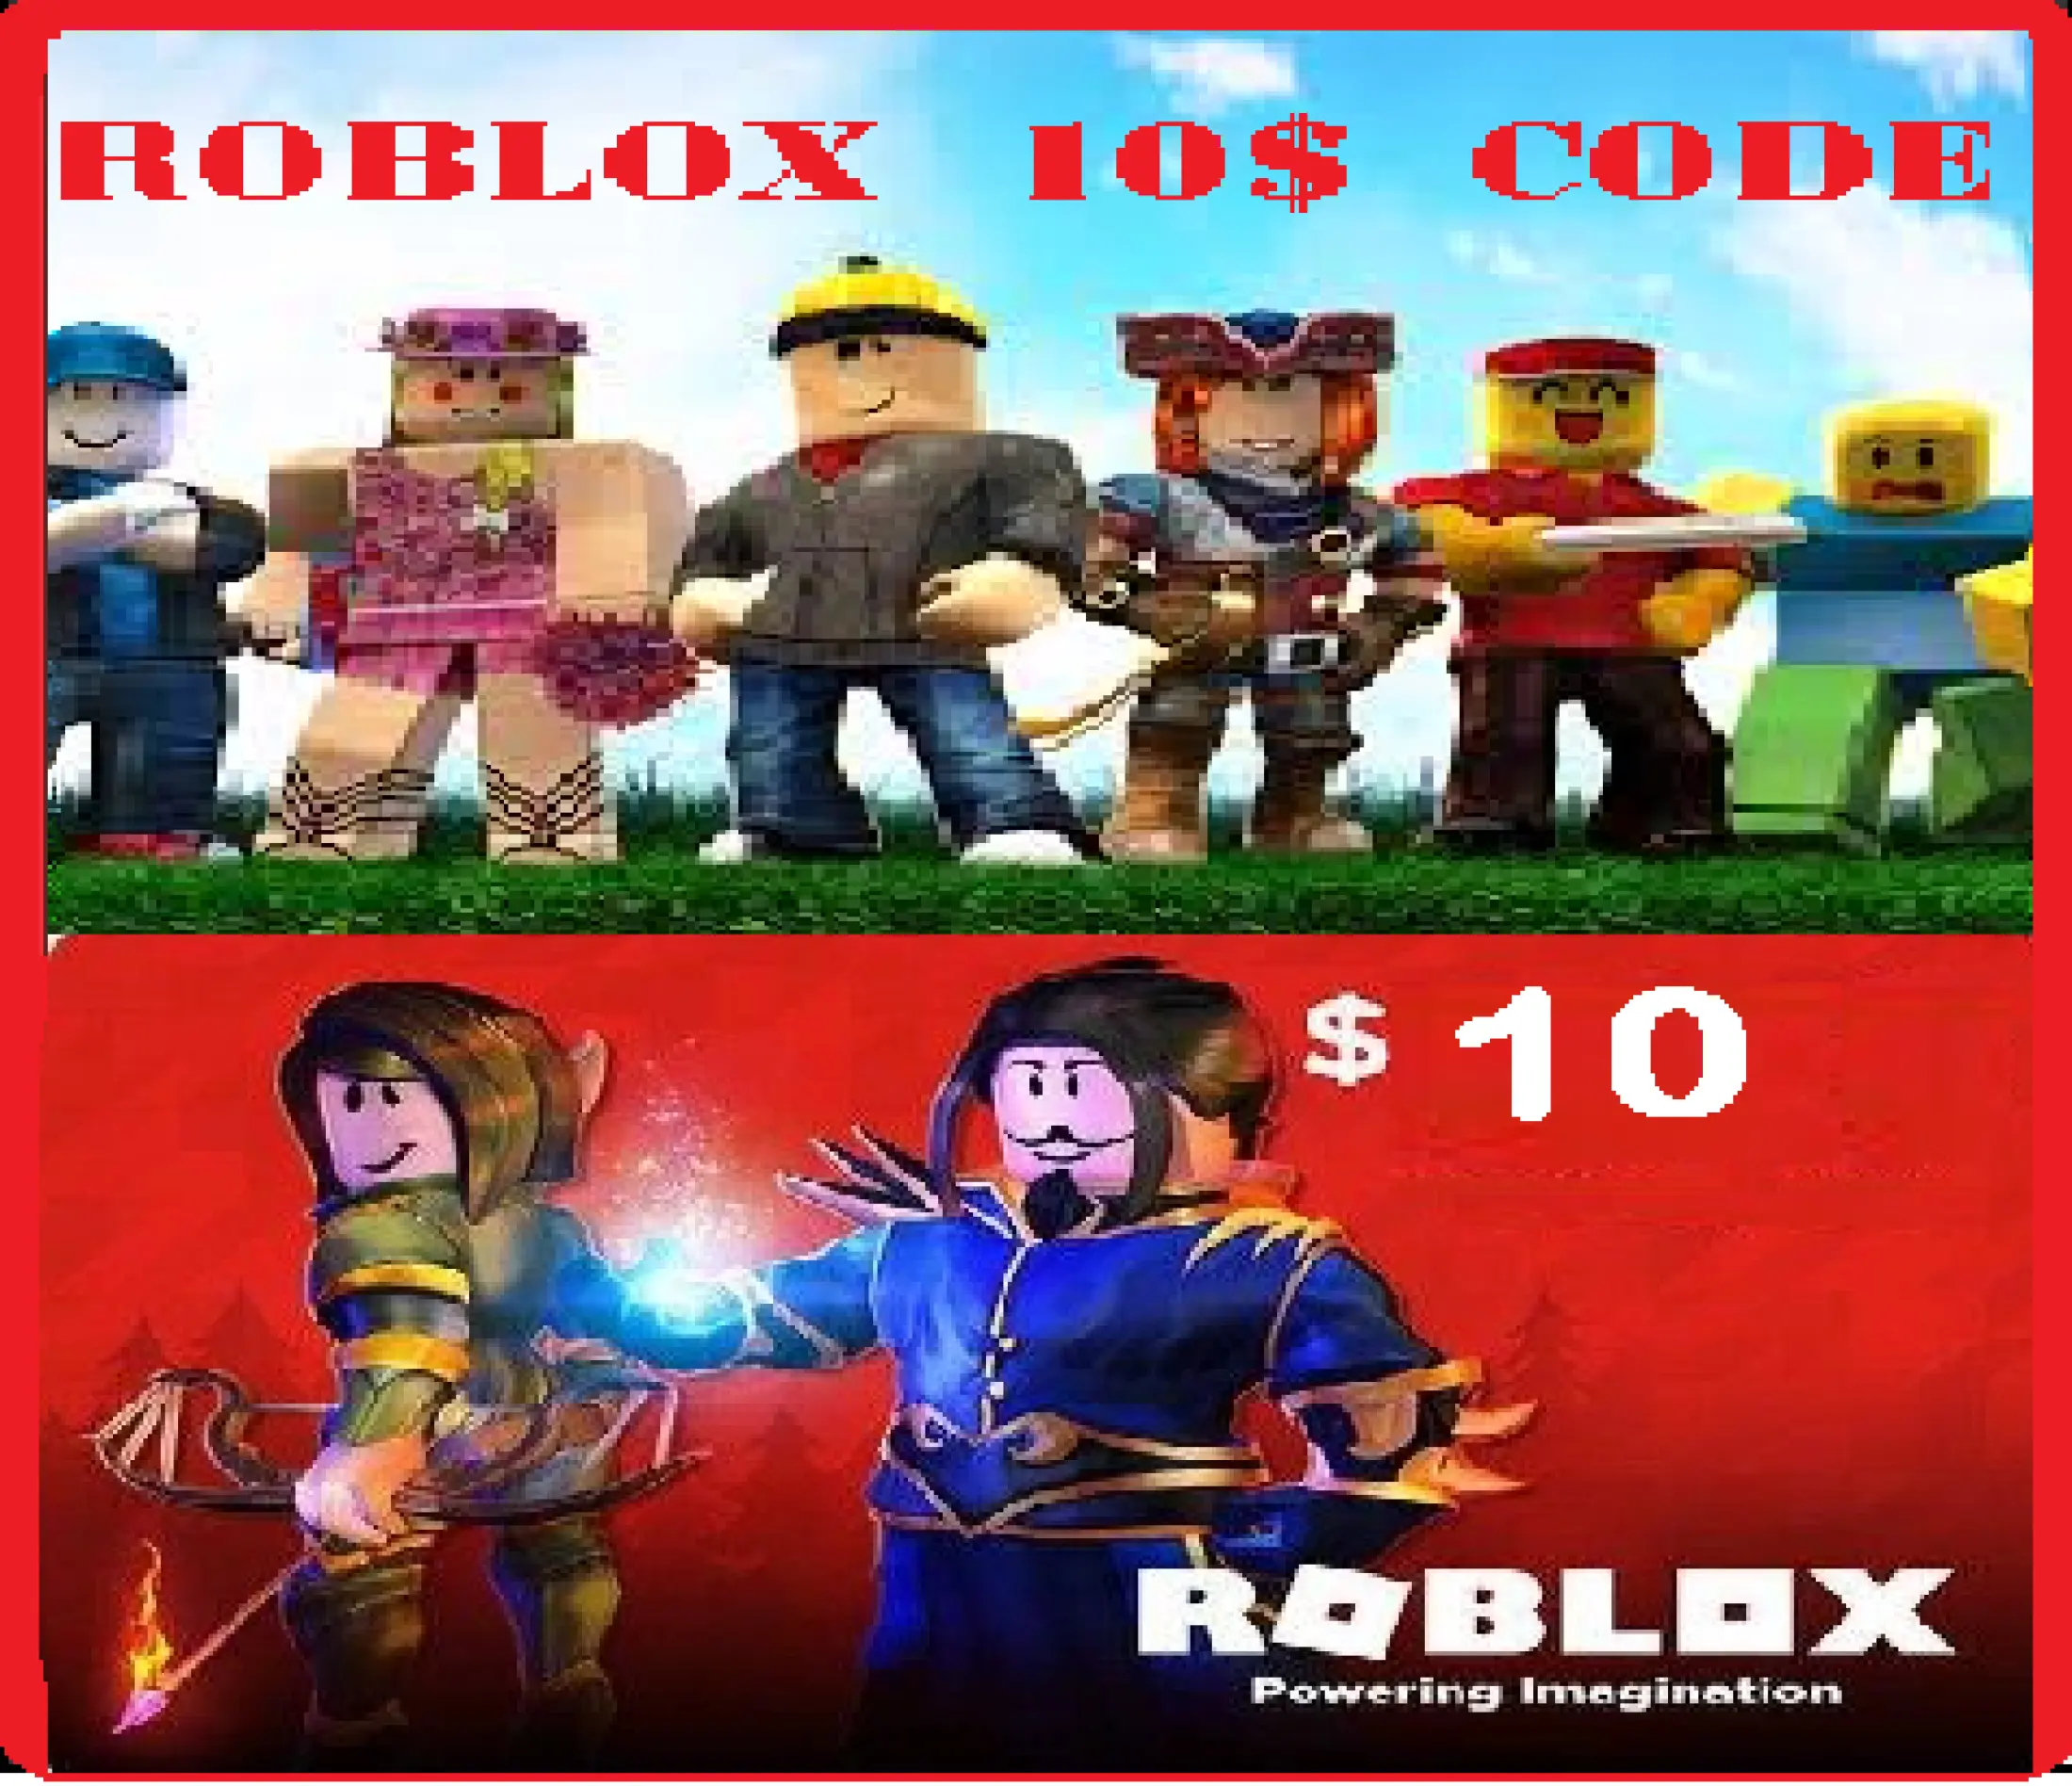 10 Roblox Code Use To Buy Robux Or Premium In Roblox Lazada Ph - roblox buying 800 rubux